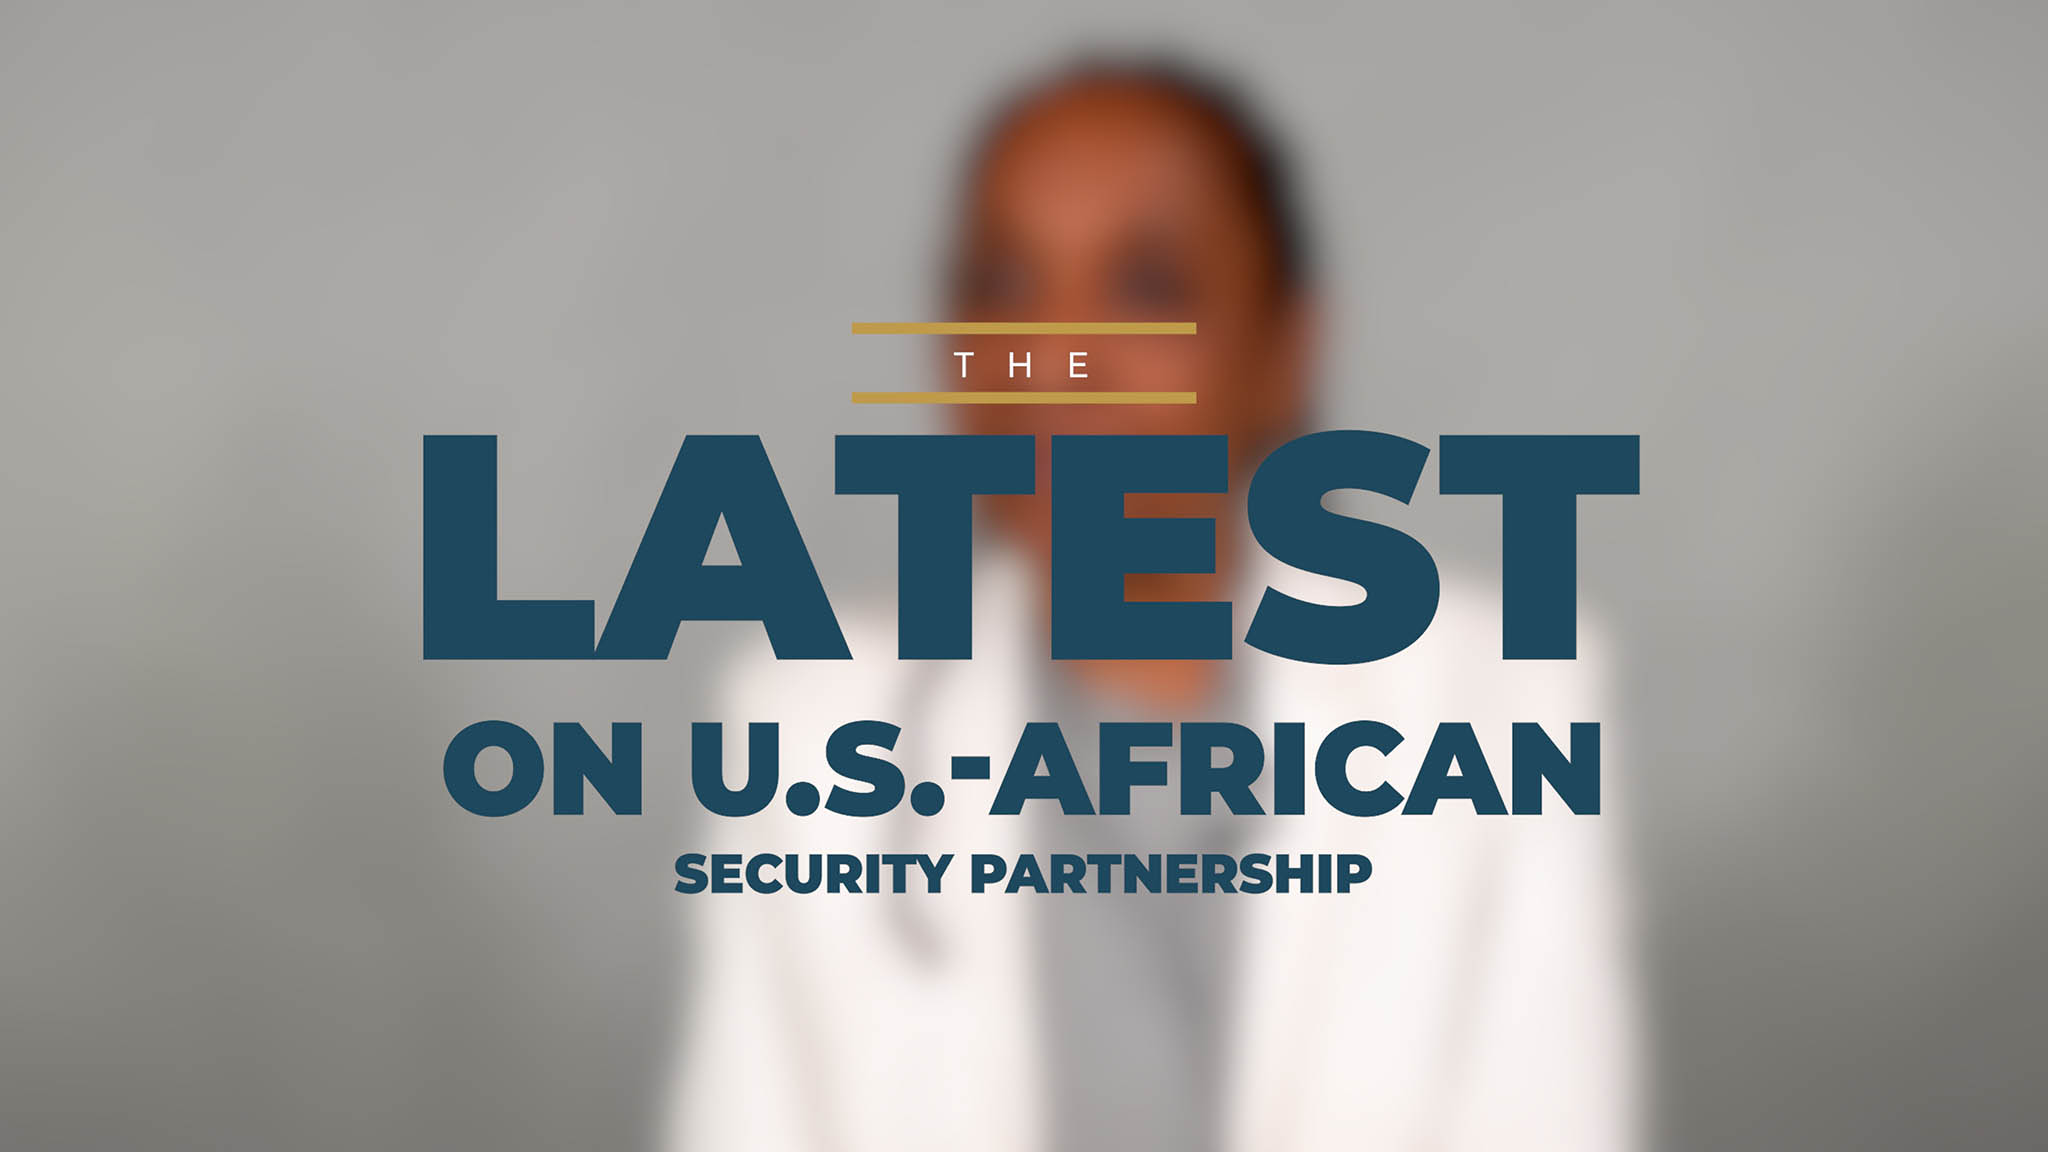 The Latest: Three Things to Know About the U.S.-Africa Security Partnership thumbnail